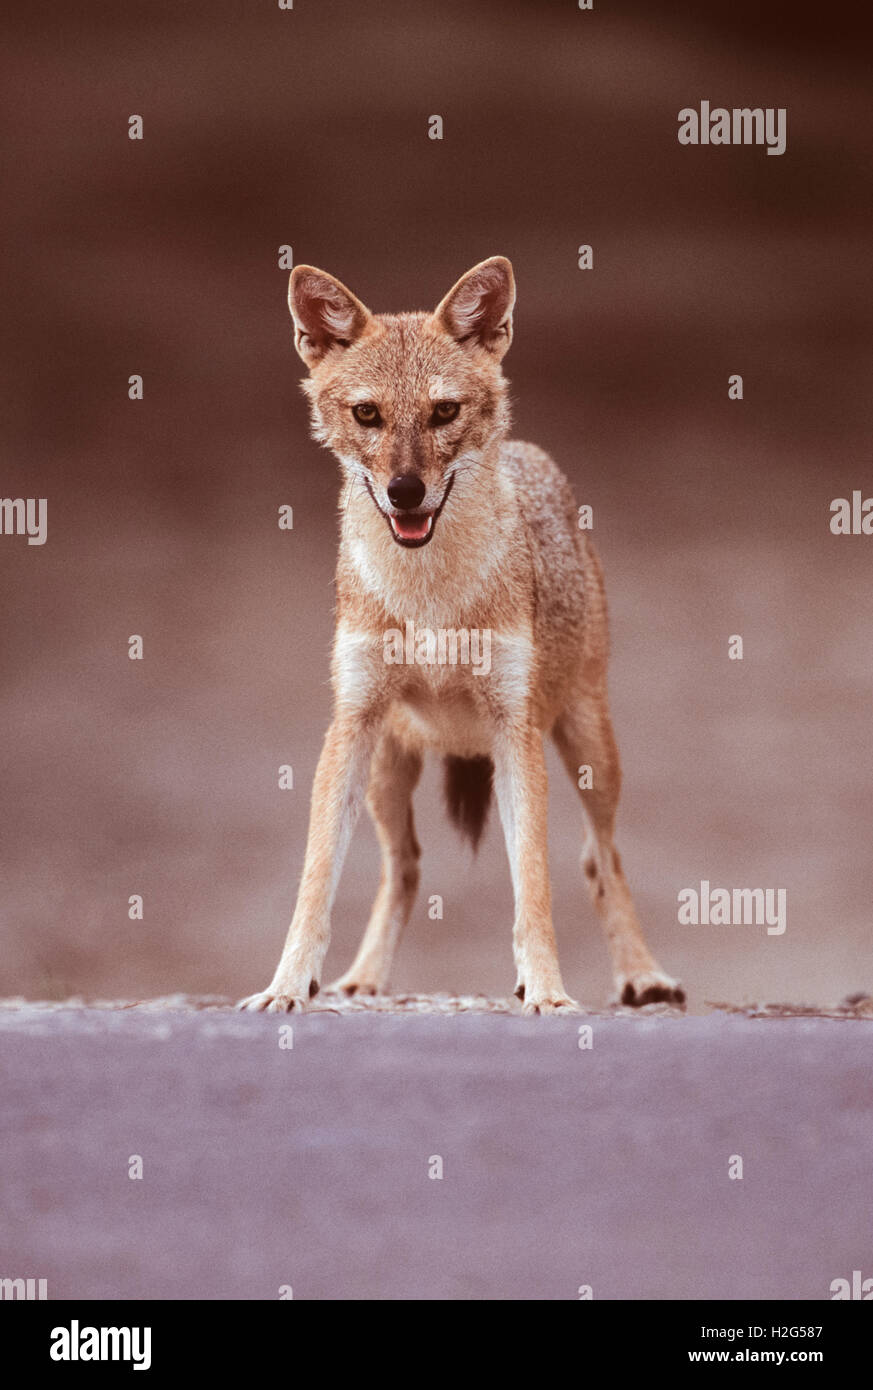 Indian Jackal, (Canis aureus indicus), standing on road in the Keoladeo Ghana National Park, Bharatpur, India Stock Photo